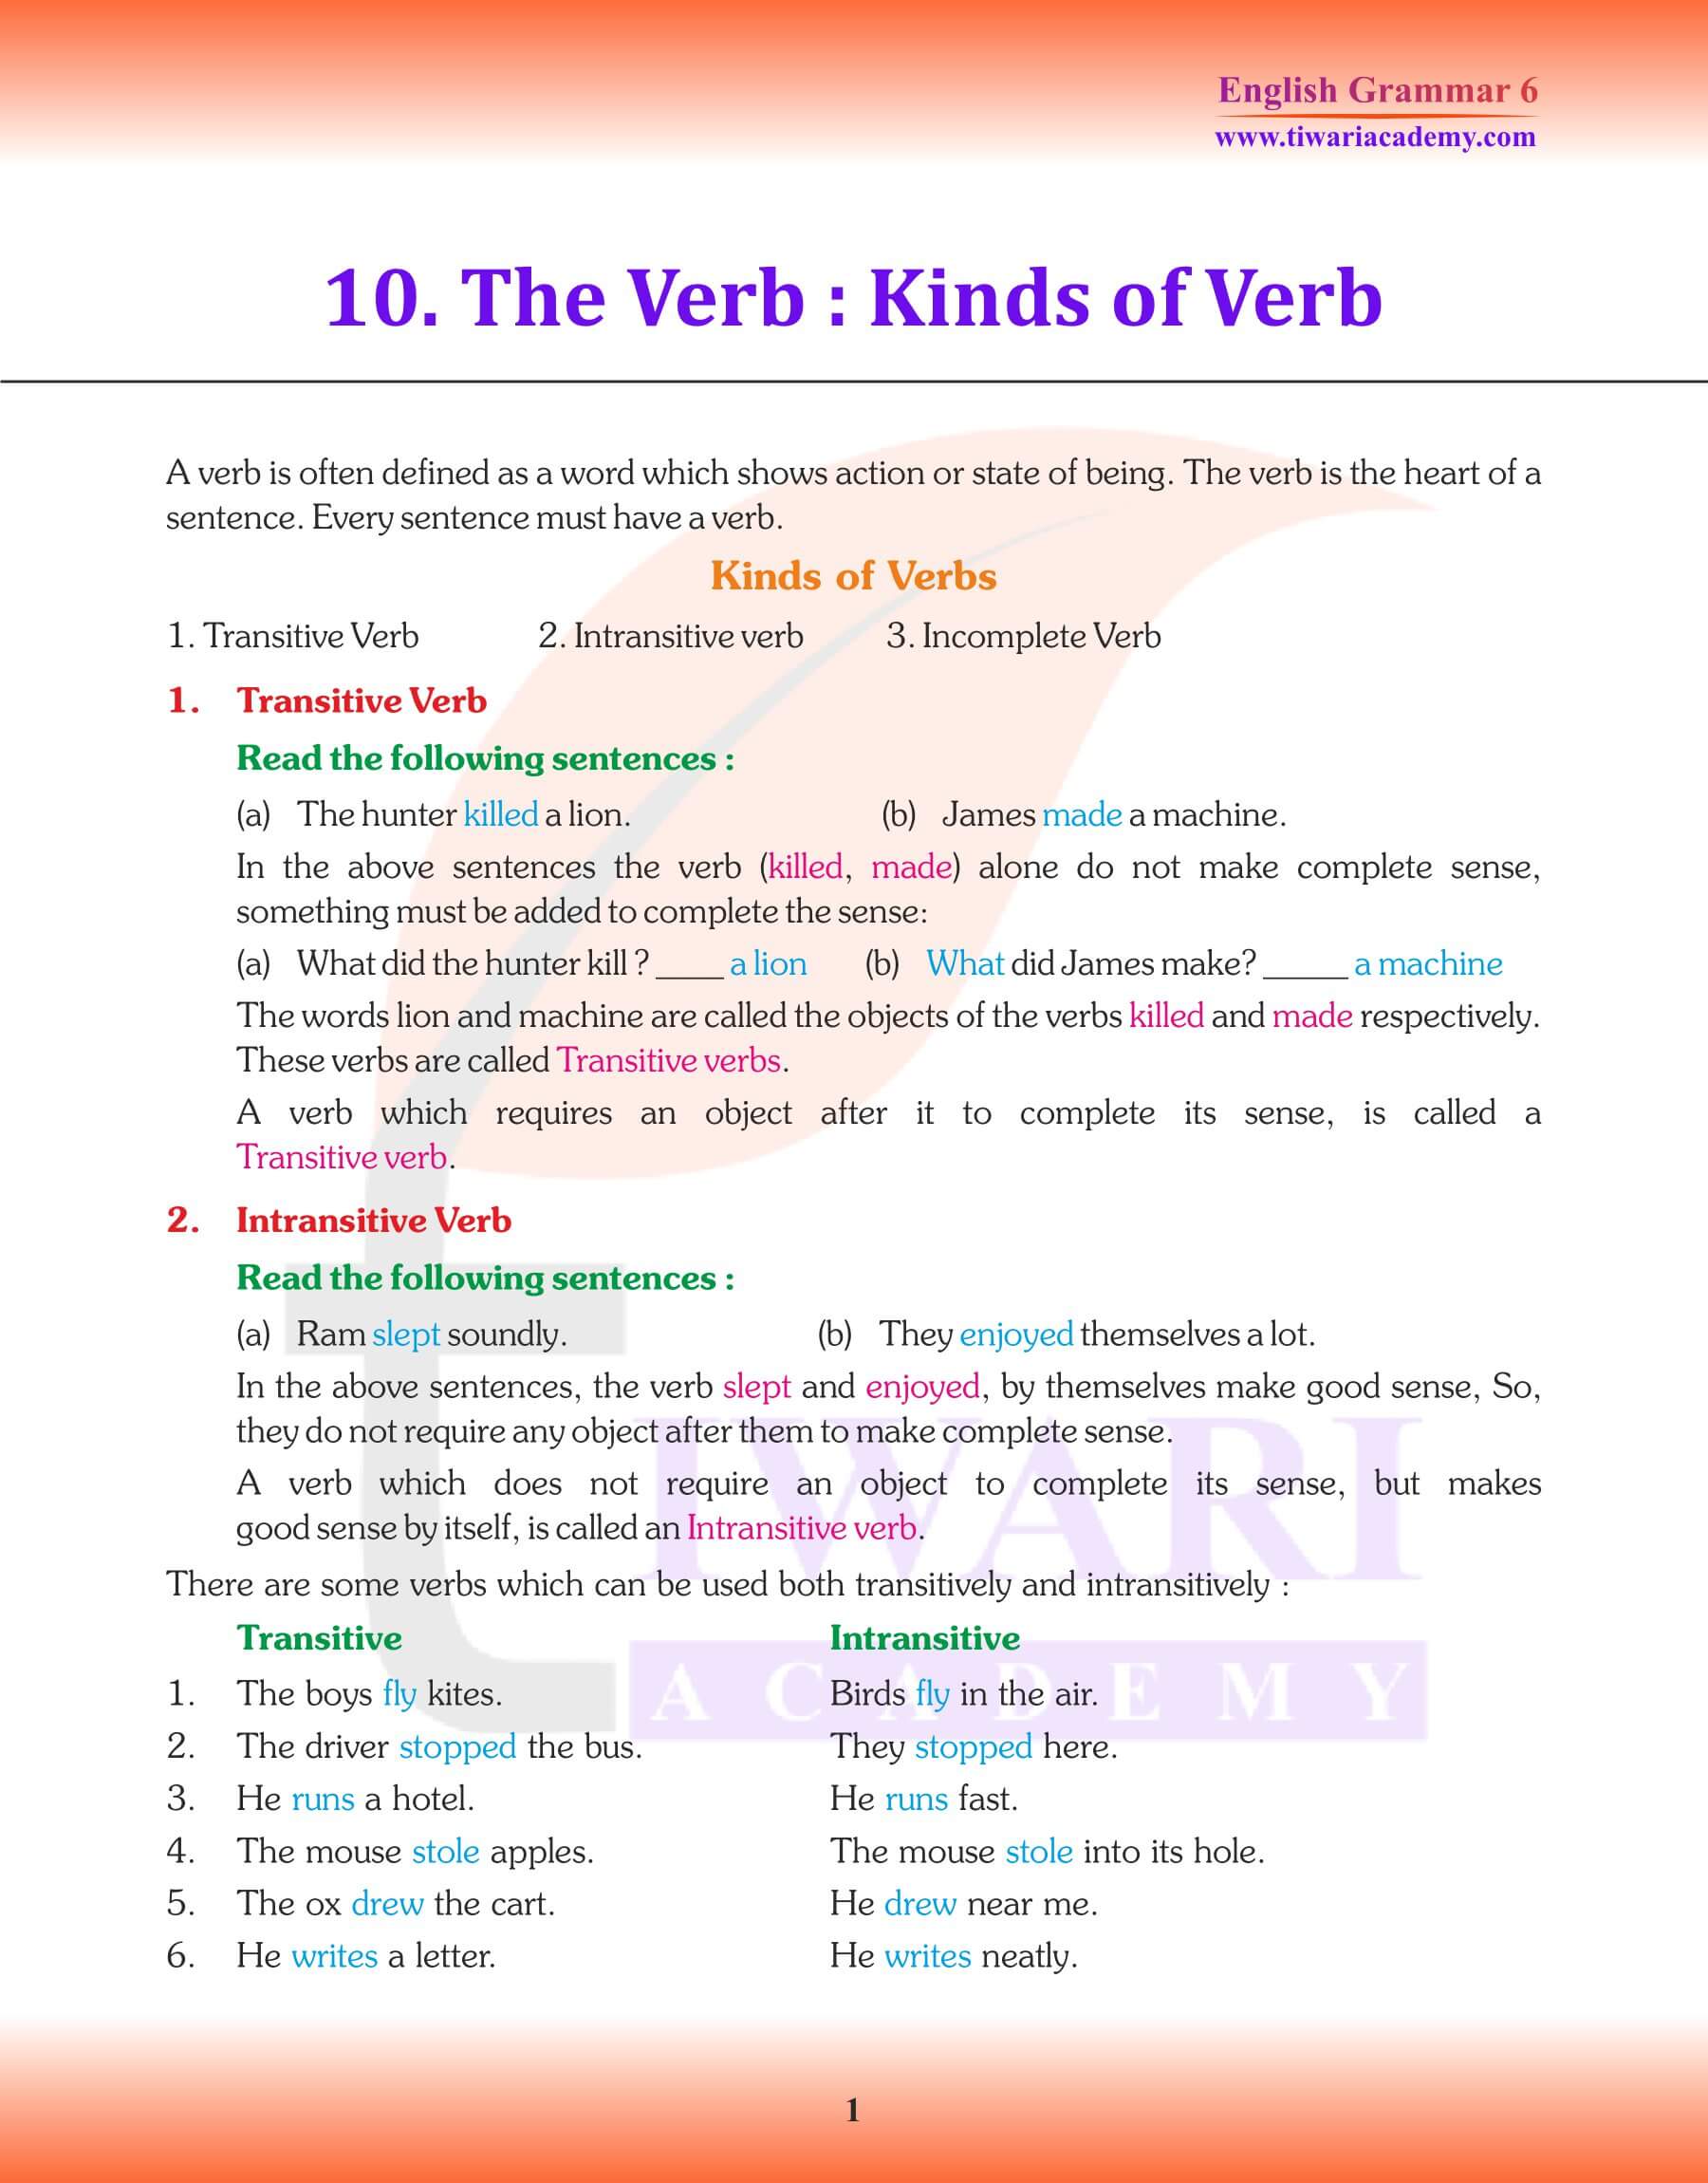 Class 6 English Grammar The Verb Kinds of Verb Revision book